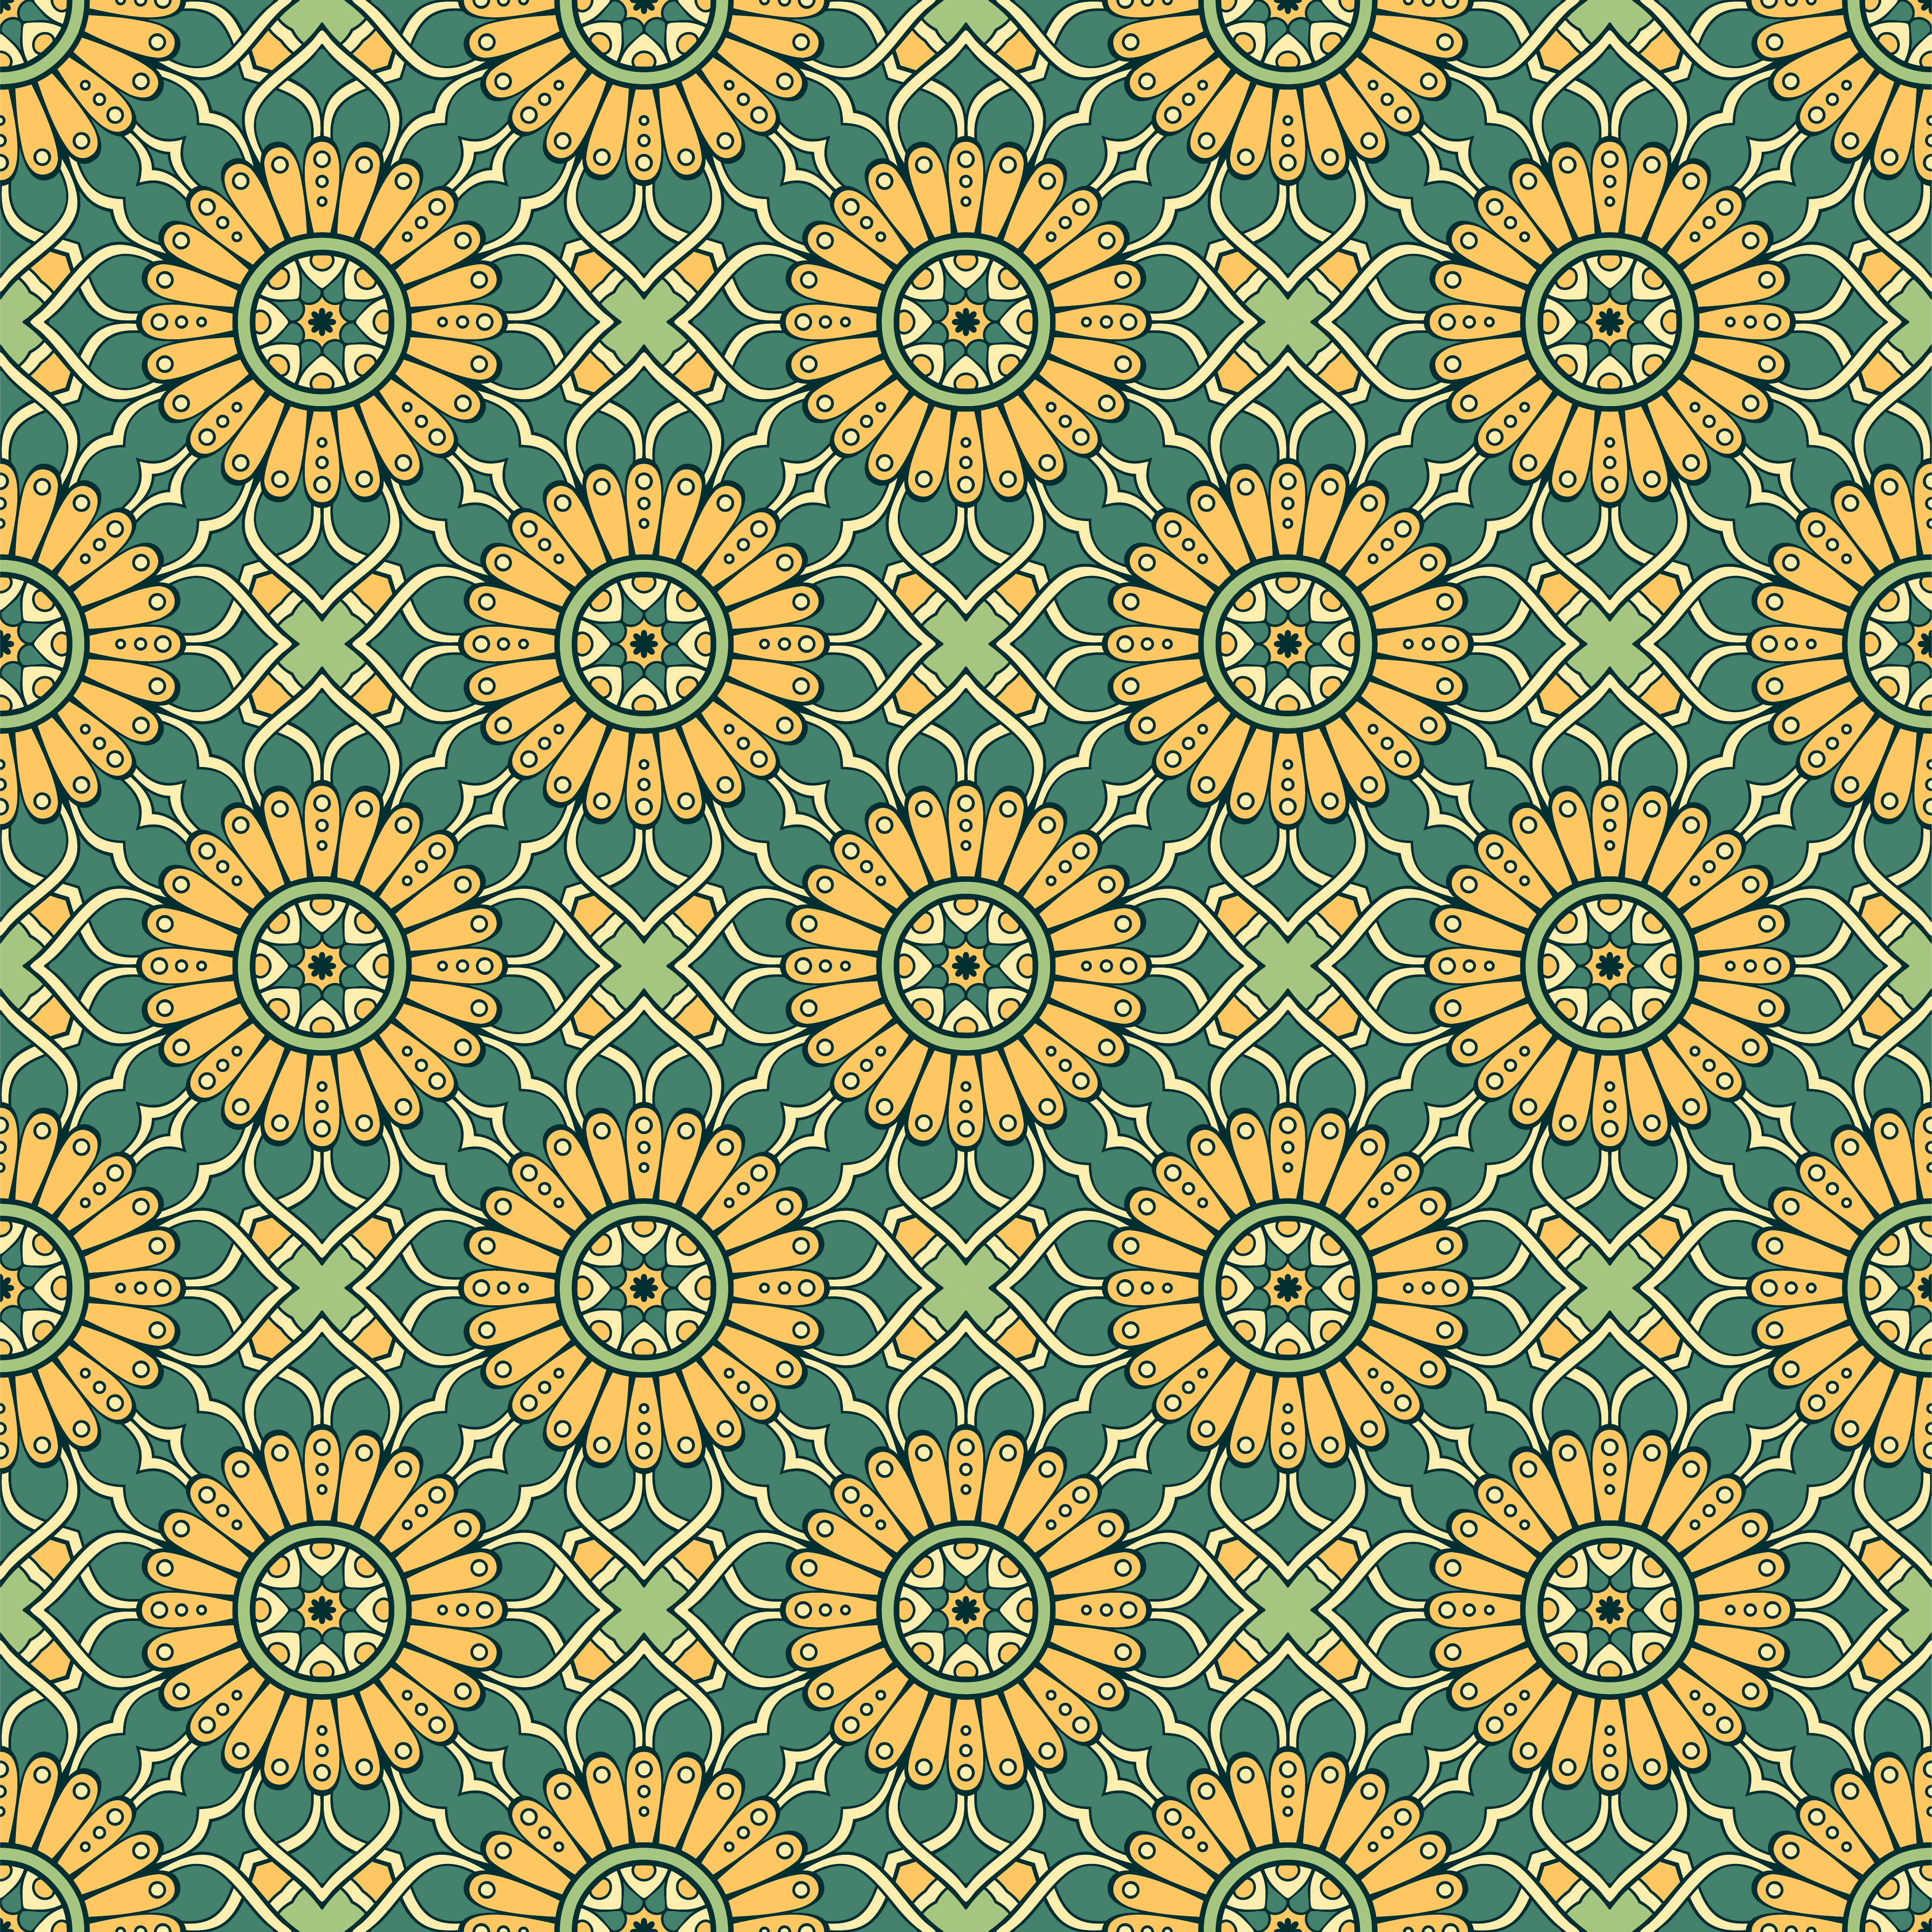 General 5001x5000 pattern texture flowers abstract